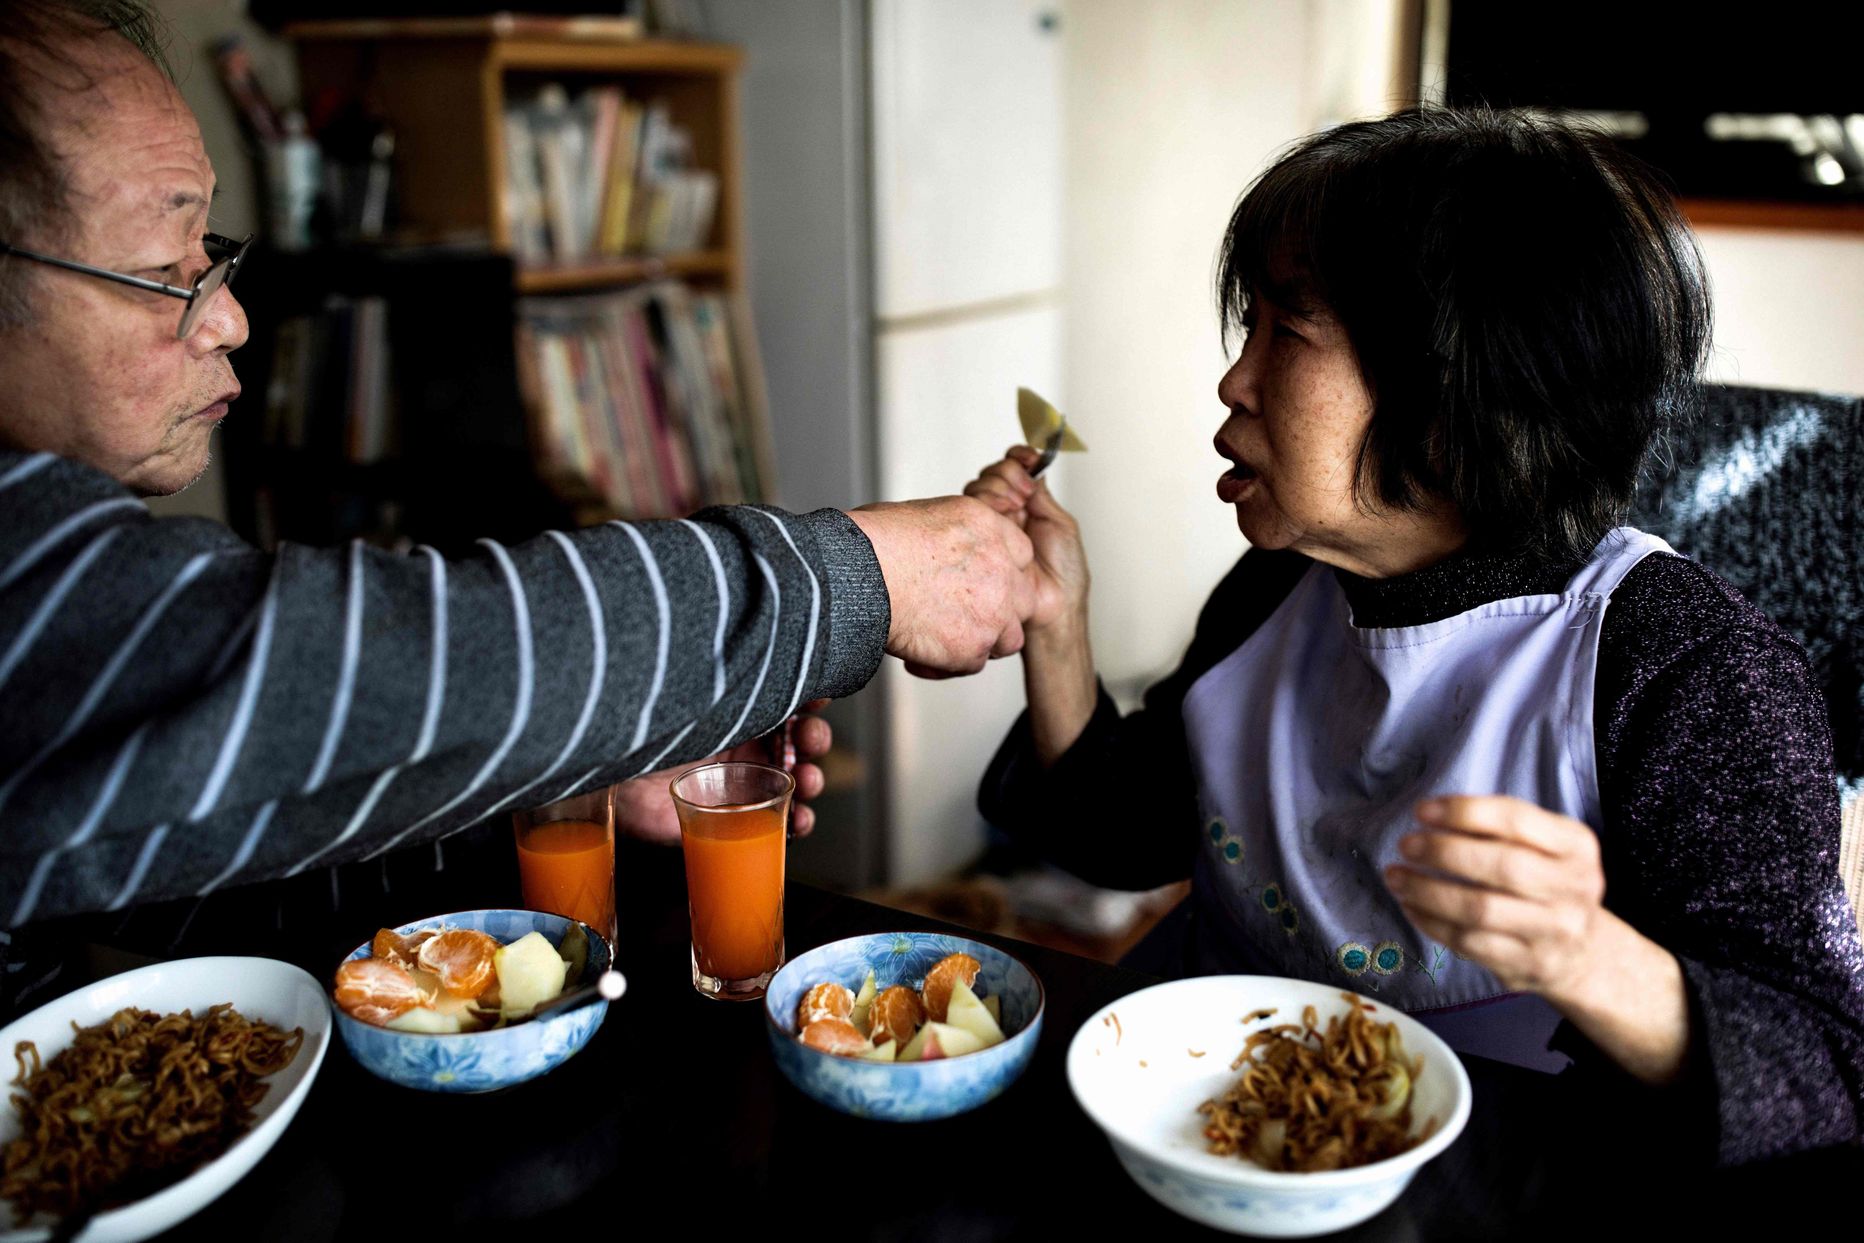 In this picture taken on January 10, 2017, Kanemasa Ito (L) feeds his dementia-stricken wife Kimiko at their house in Kawasaki.
One of the world's most rapidly aging and long-lived societies, Japan is at the forefront of an impending global healthcare crisis. Authorities are bracing for a dementia timebomb and their approach could shape policies well beyond its borders. / AFP PHOTO / BEHROUZ MEHRI / TO GO WITH Japan-society-ageing-dementia,FEATURE by Natsuko FUKUE